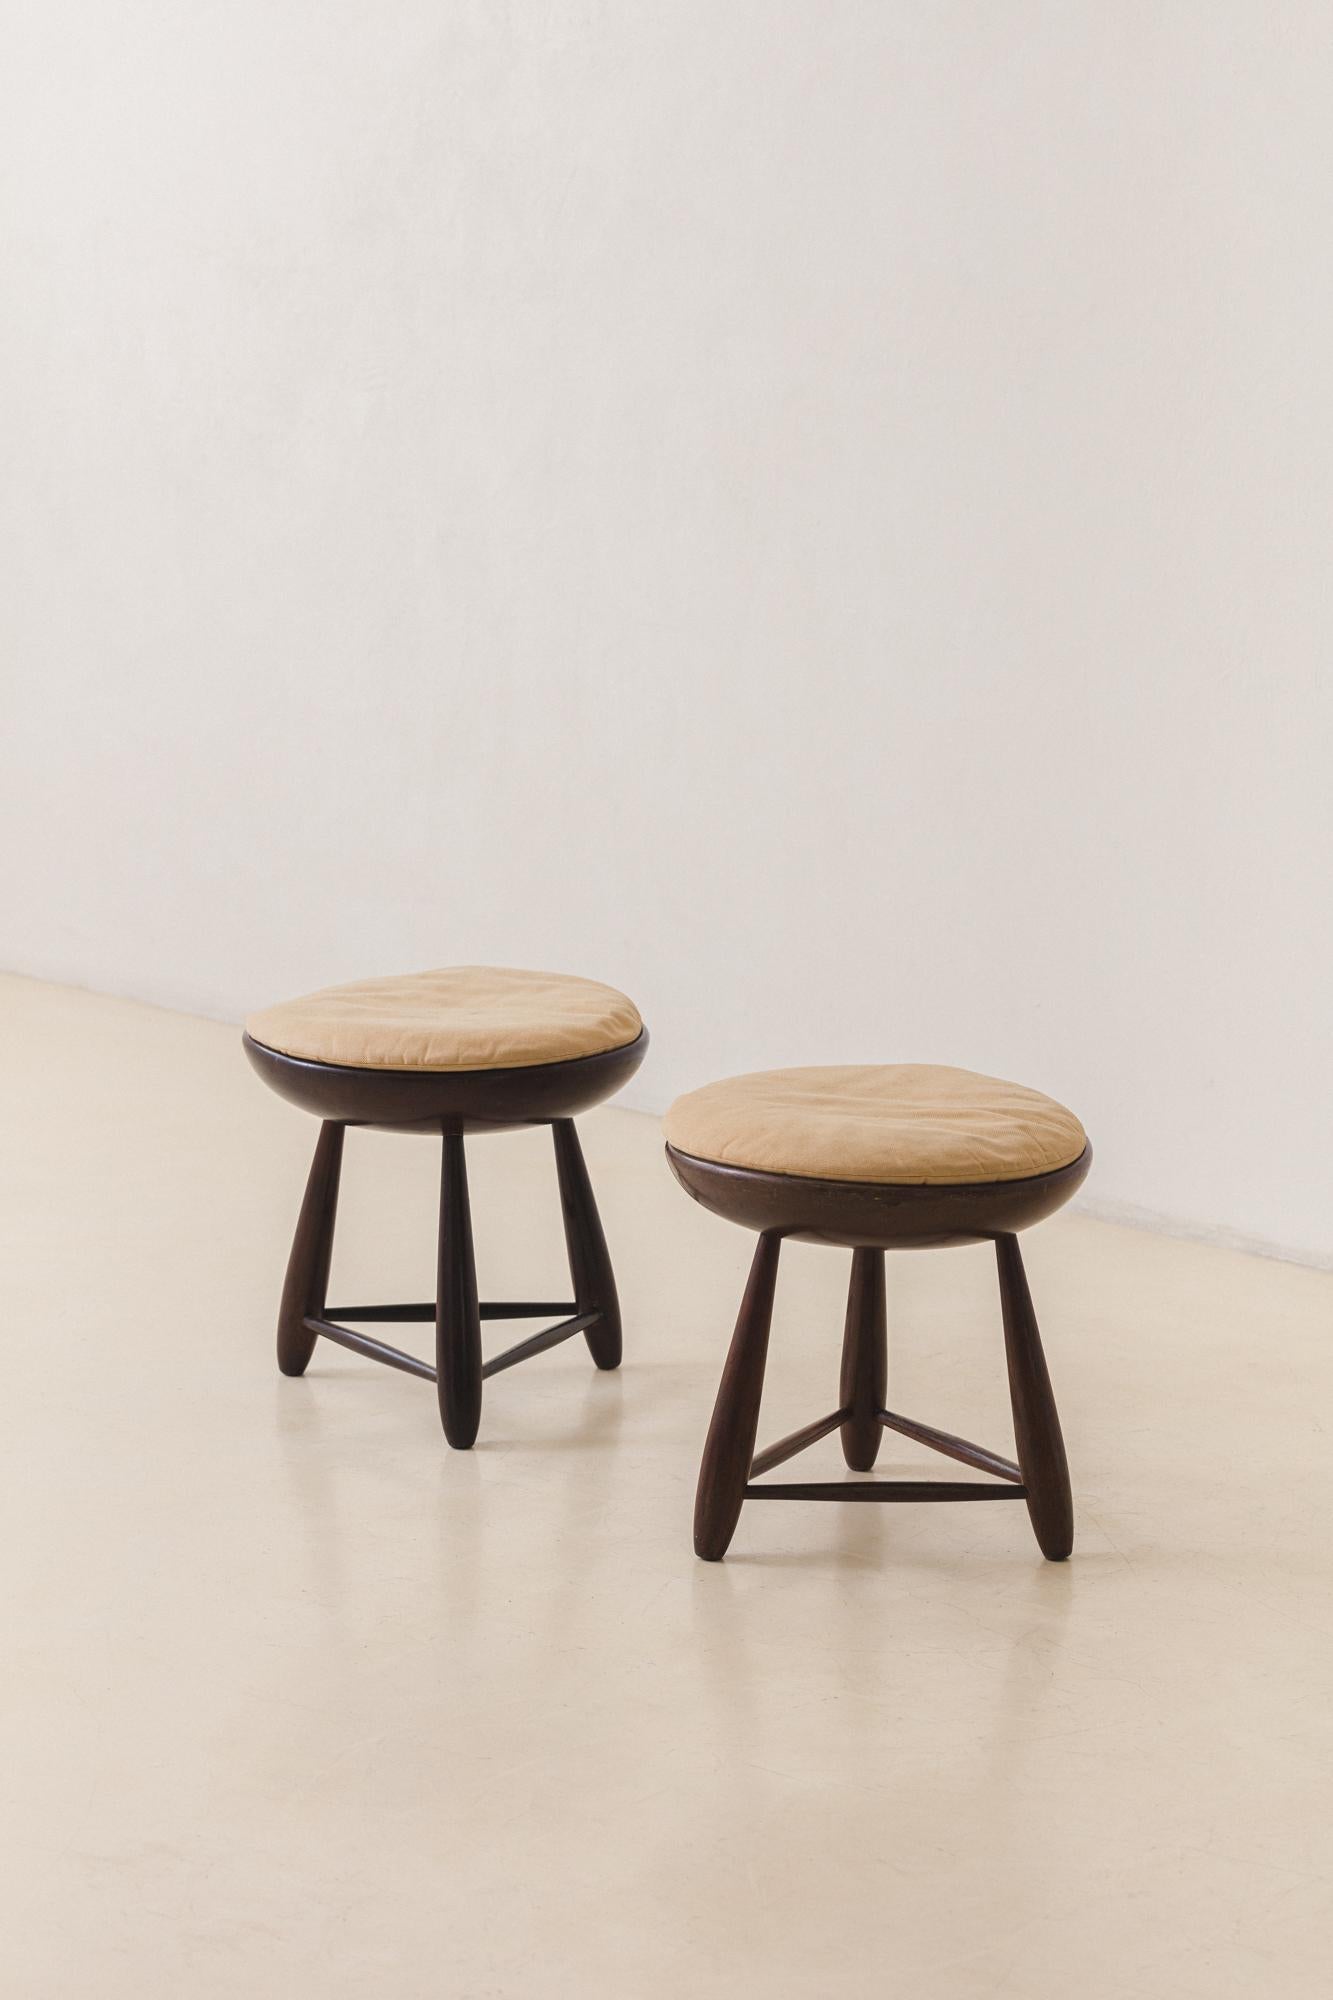 The Mocho stool is one of the most iconic pieces designed by Sergio Rodrigues in 1954, before founding the Oca store. This pair is made of gorgeous solid Rosewood in very good vintage condition with its original cushions. 

As a free